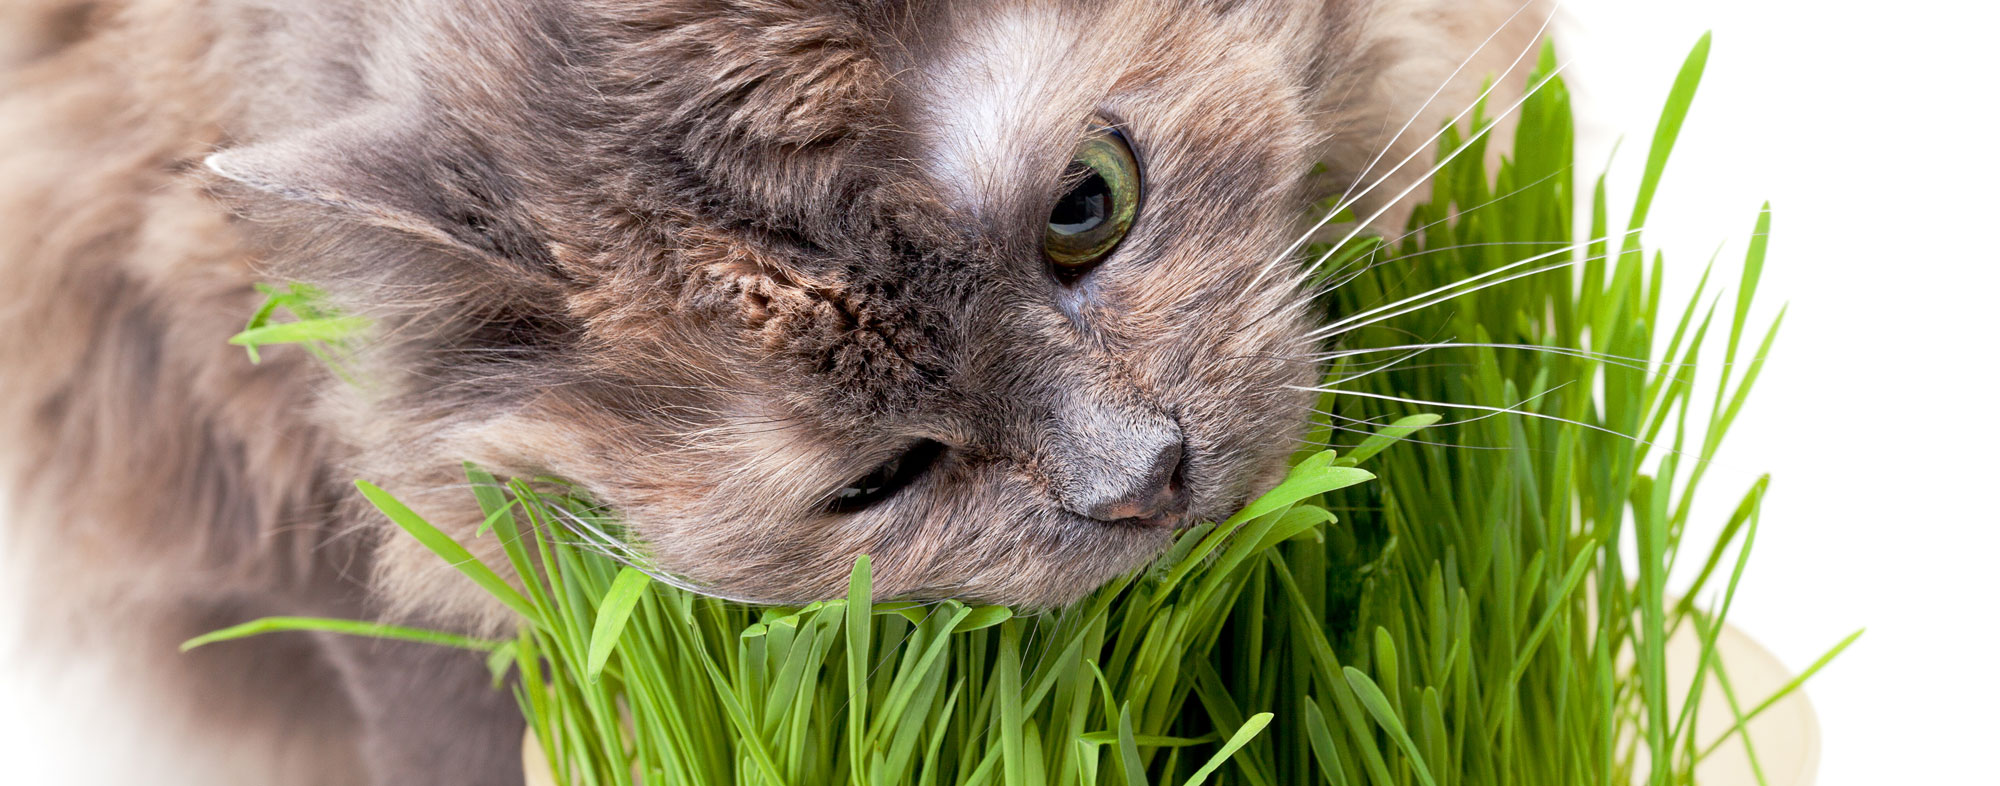 Stop your cat from devouring your plants by investing in cat grass